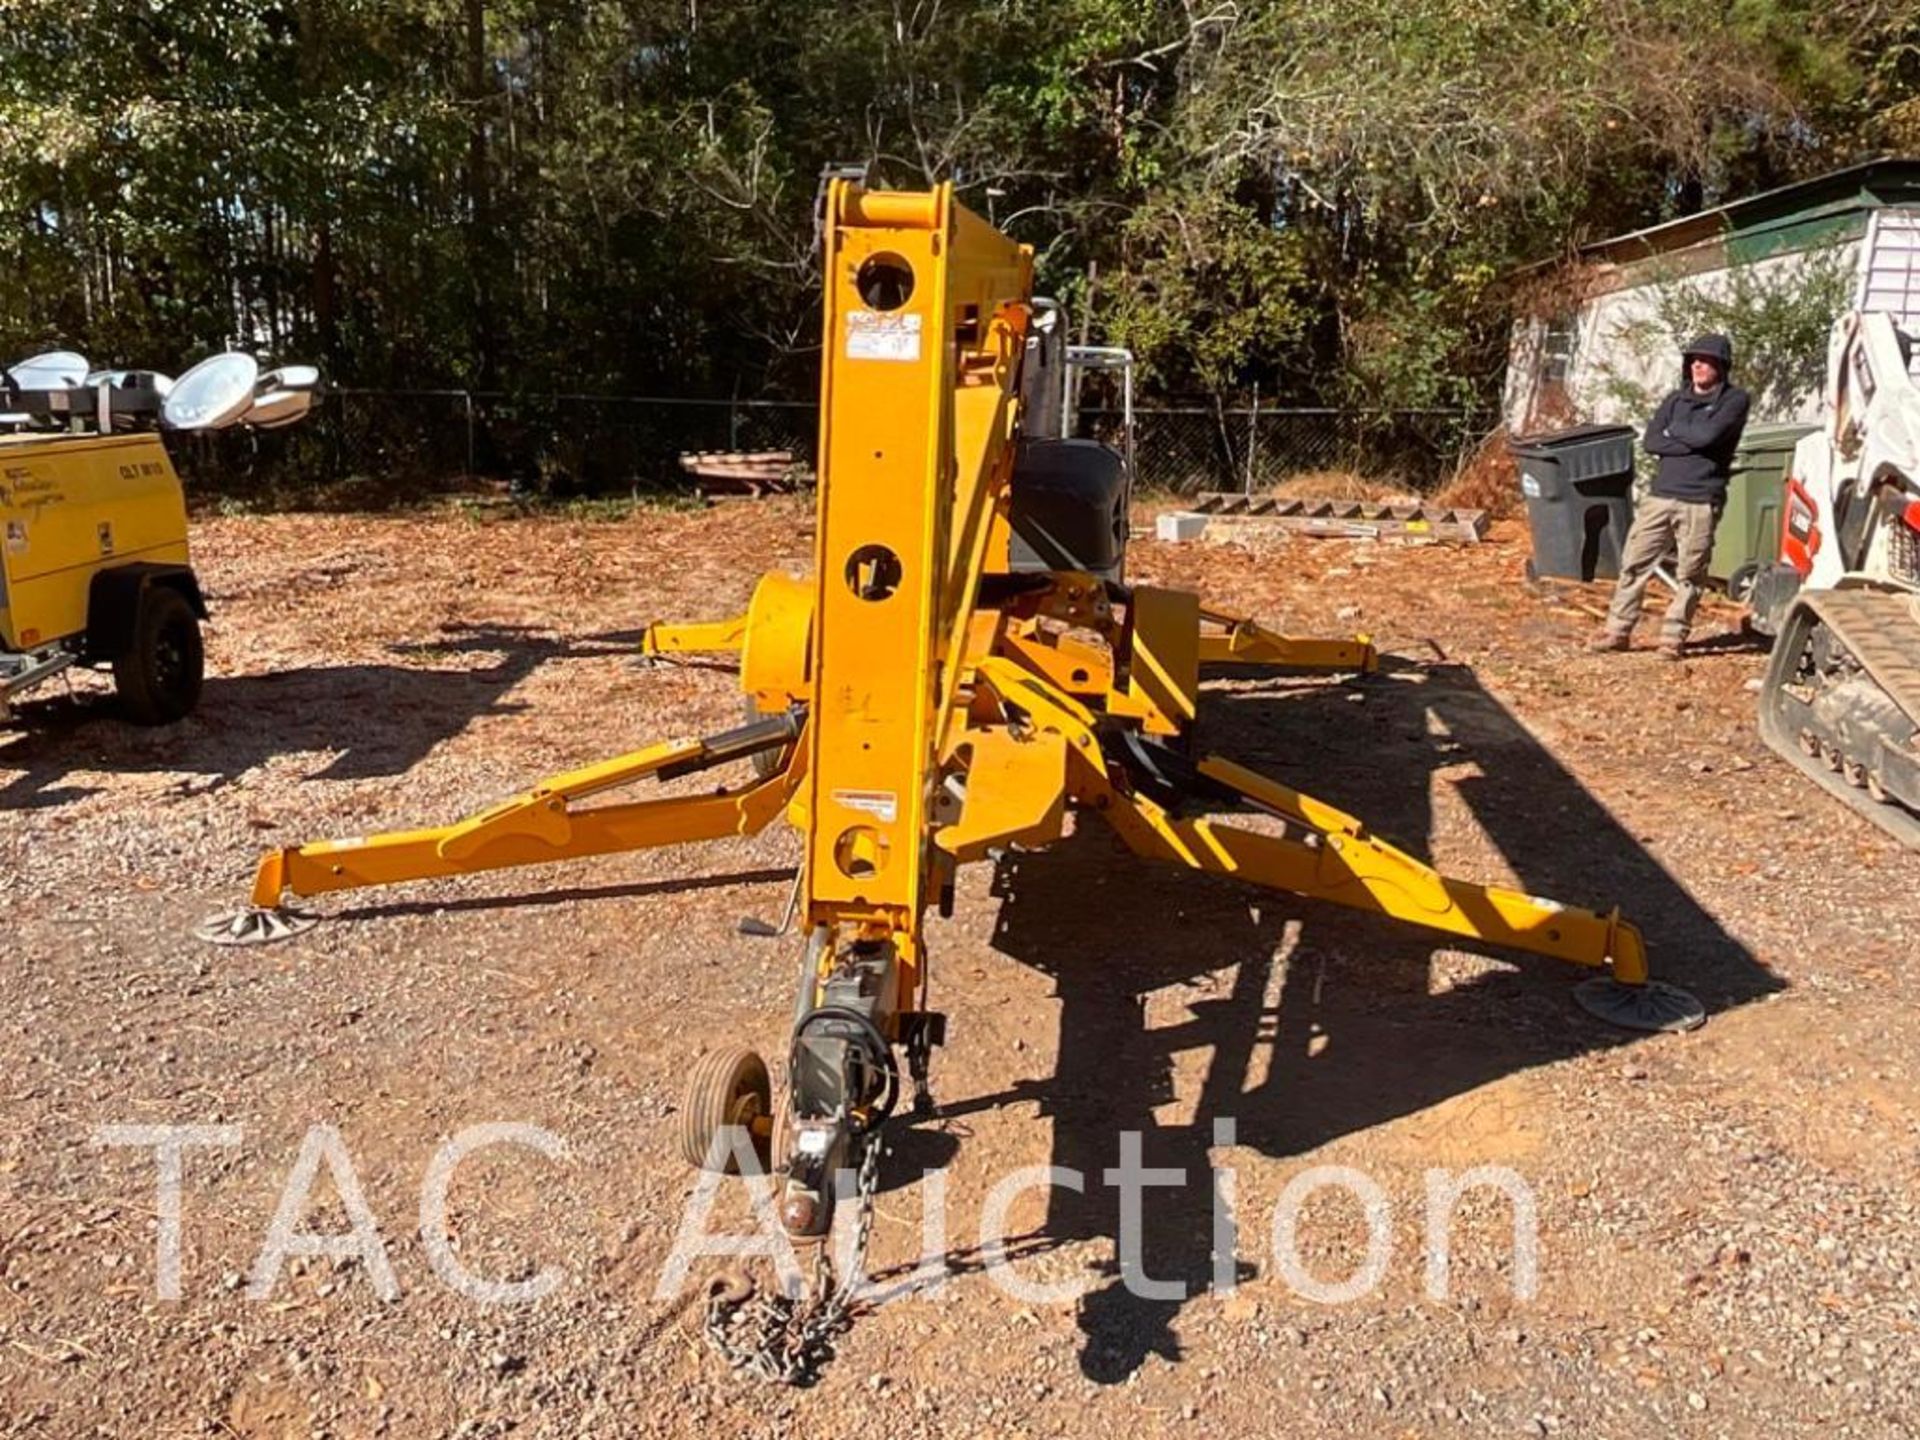 2017 Haulotte 45A17 Towable Articulated/Telescopic Boom Lift - Image 8 of 13